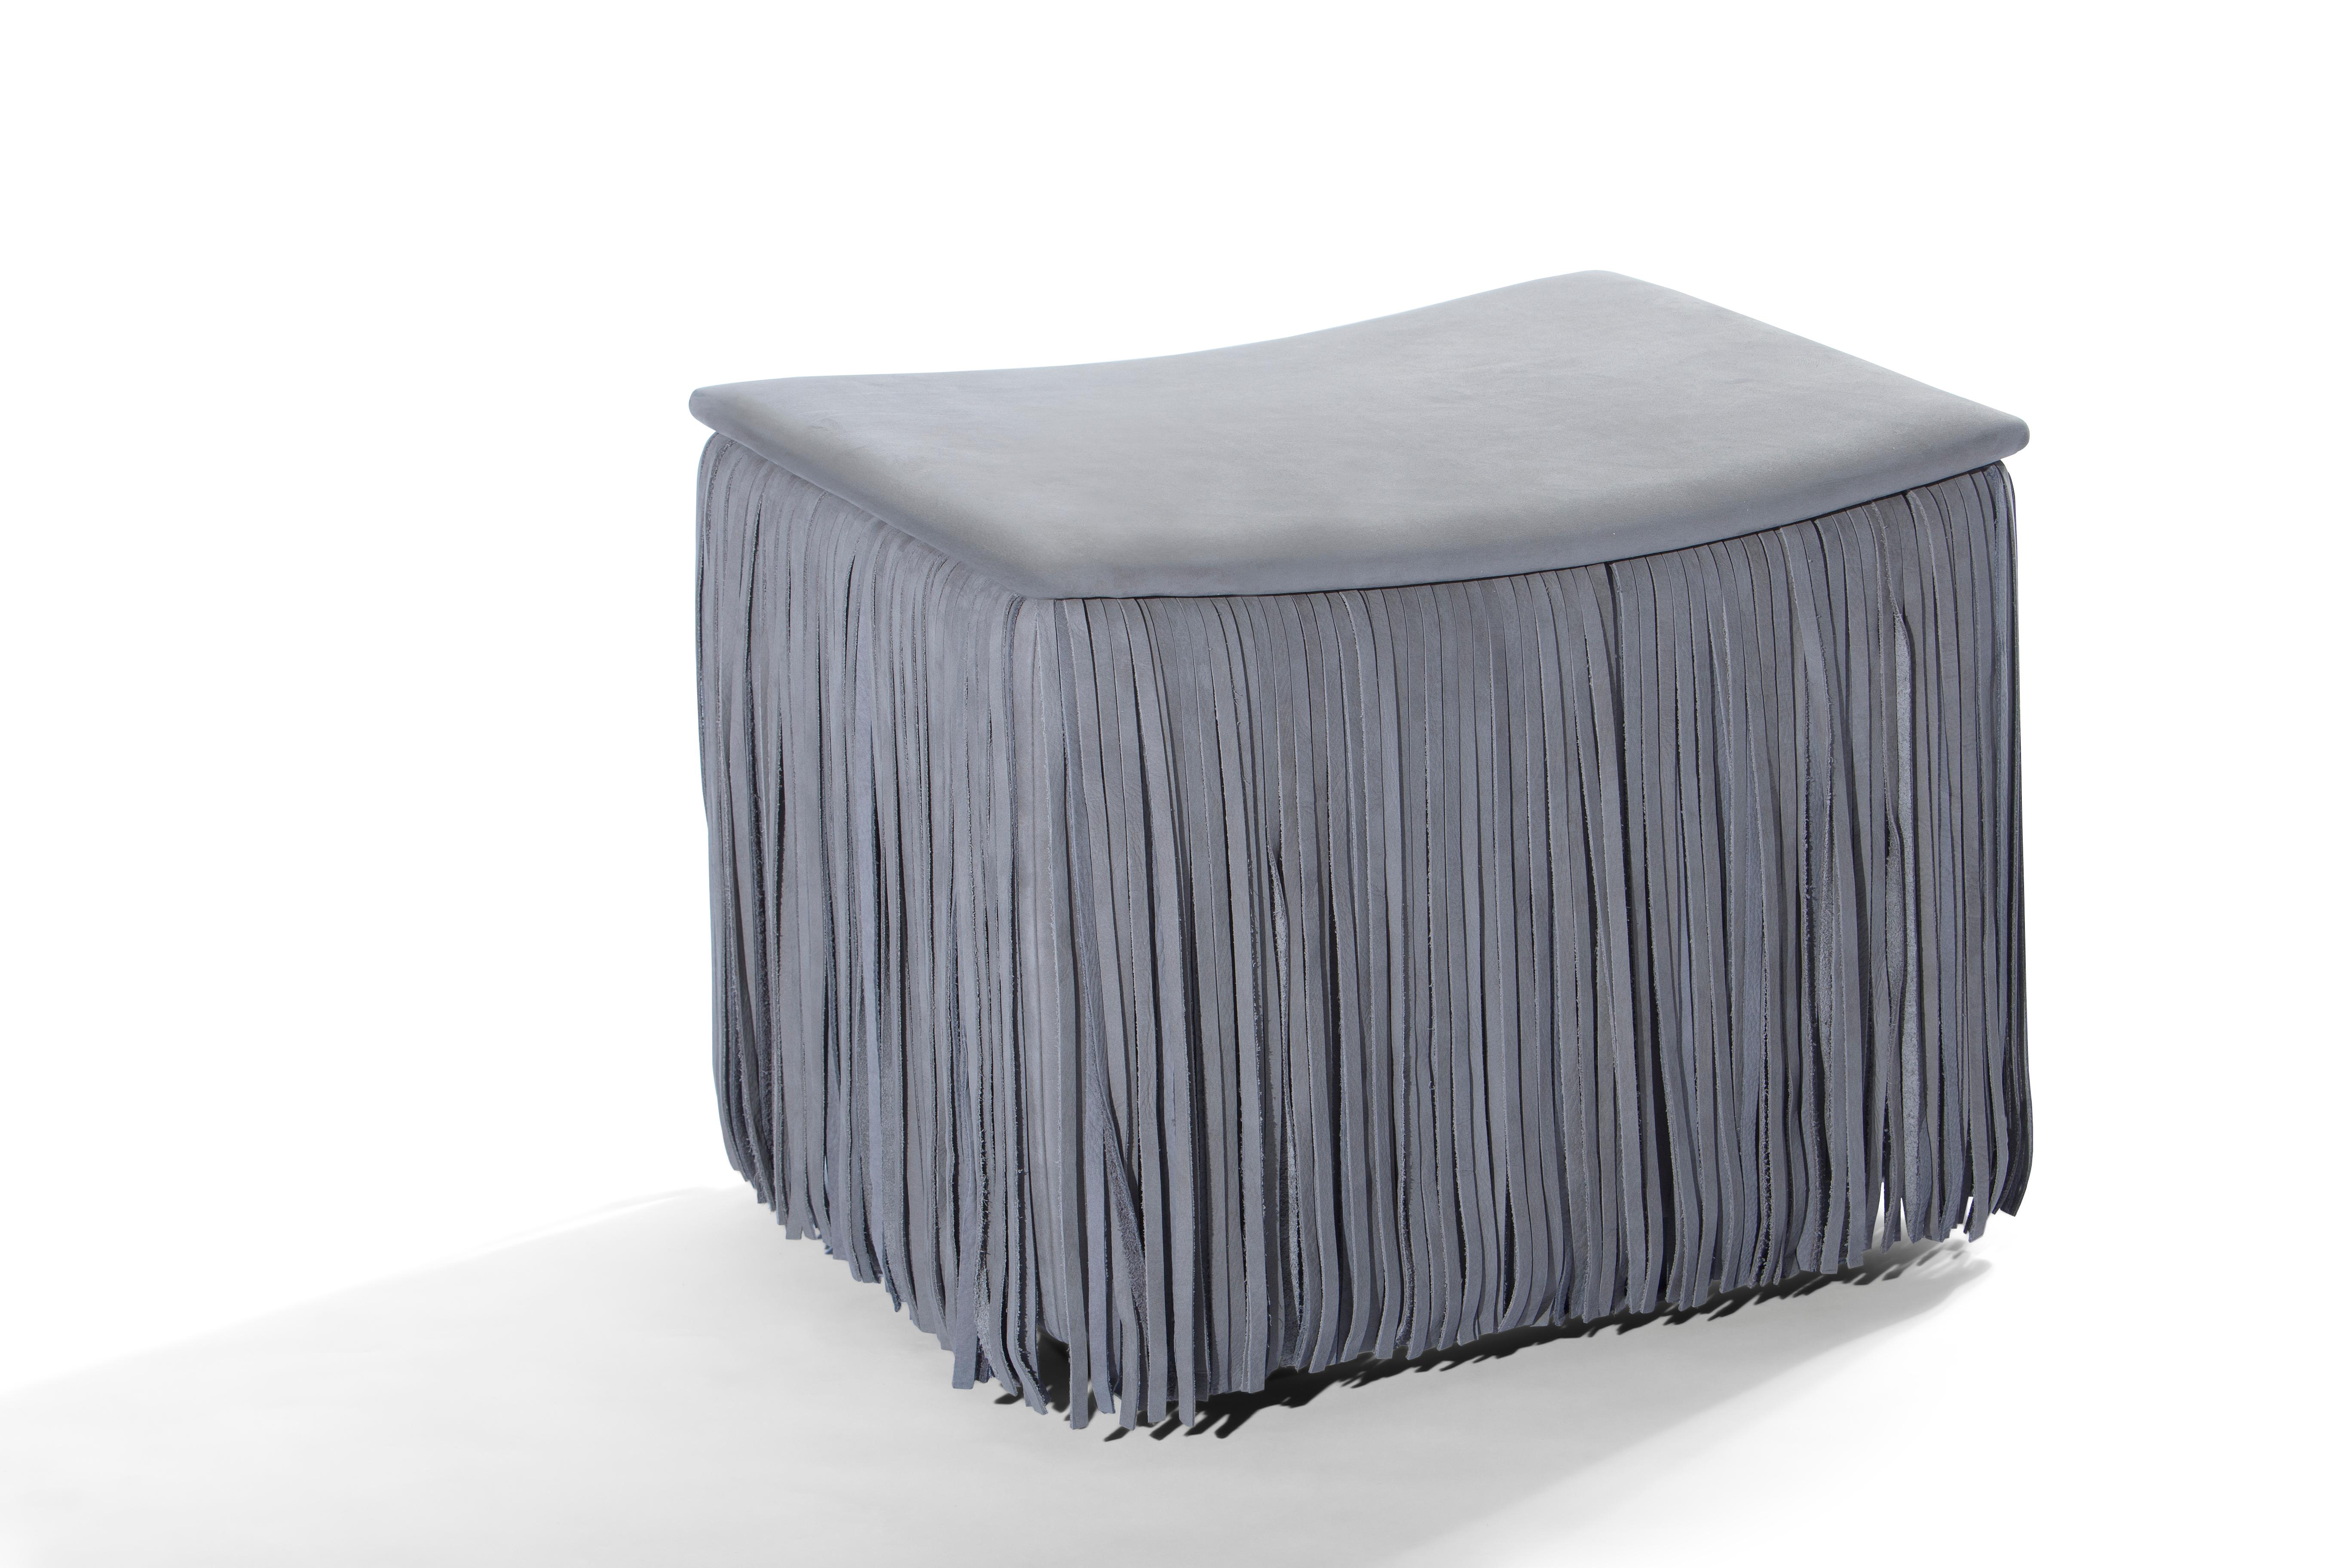 The TAGLIA introduces the timeless fashion element of fringes to haute furniture design. This little playful square ottoman with a curved seat is surrounded by a dense skirt of Nabuk leather fringes and provides your living space with a splash of